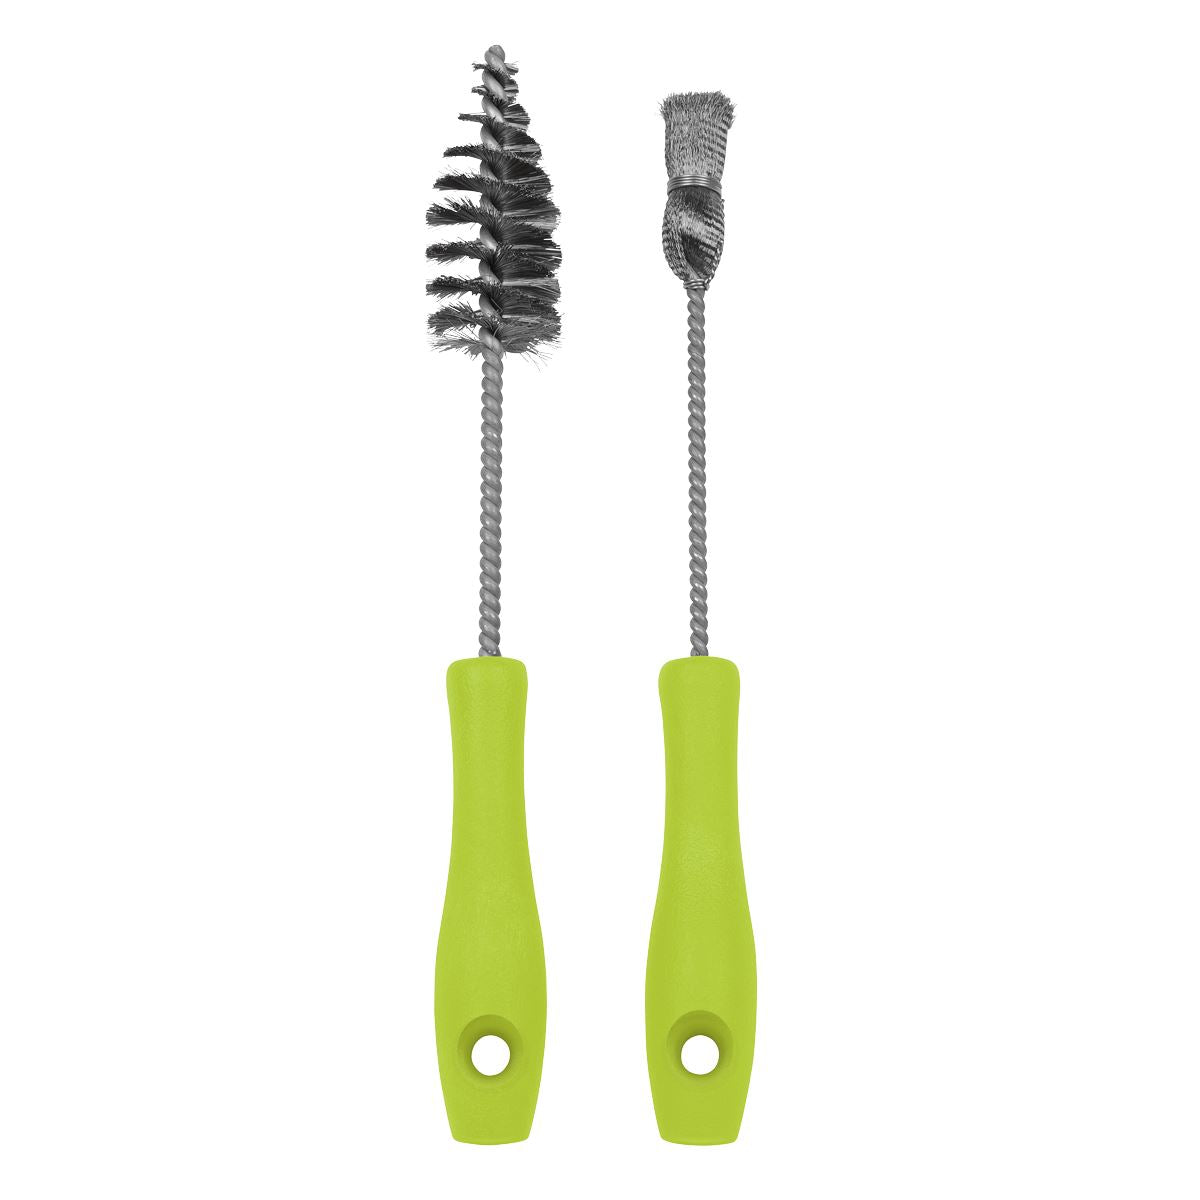 Sealey Injector Bore Cleaning Brush Set 2pc